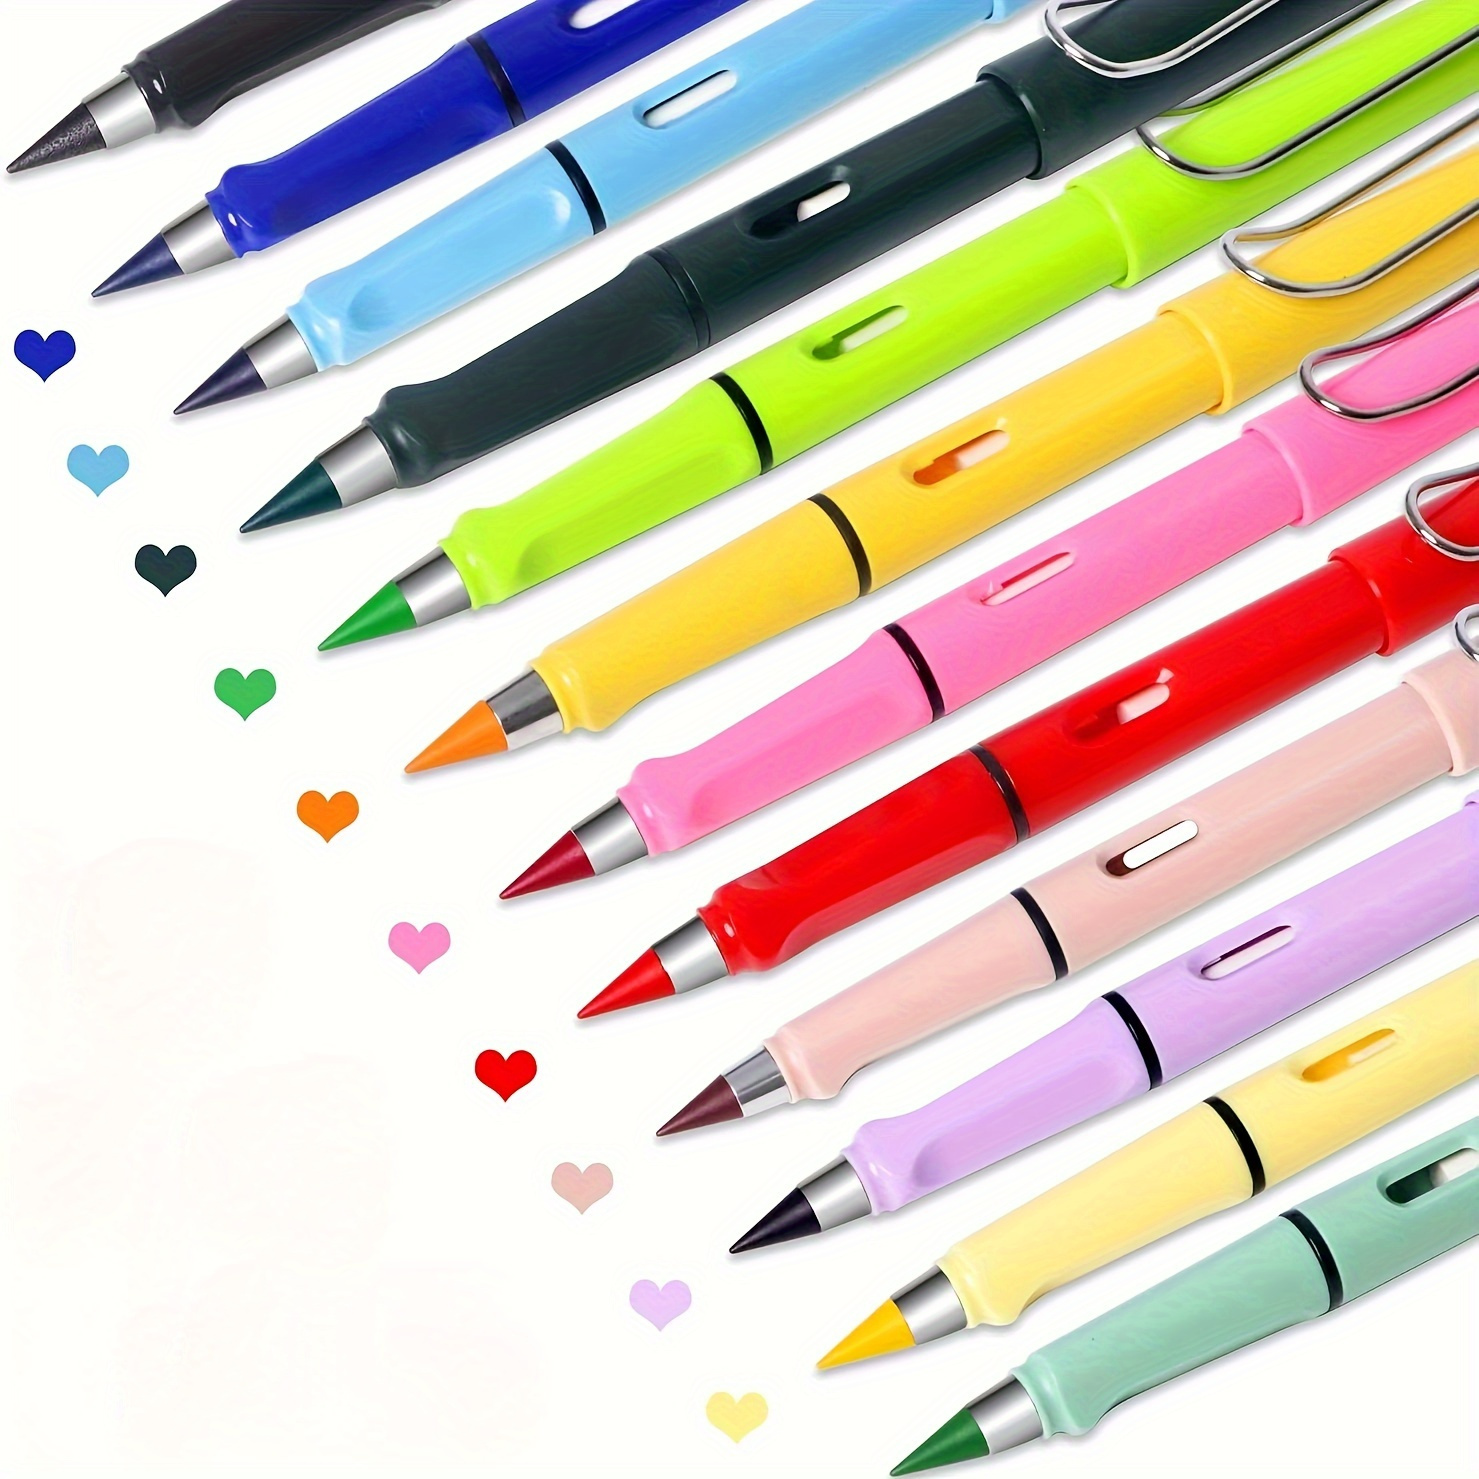 

Everlasting Inkless Pencils With Eraser - 0.5mm Hb Lead, Tungsten Carbide, Perfect For Sketching & Drawing, School Supplies